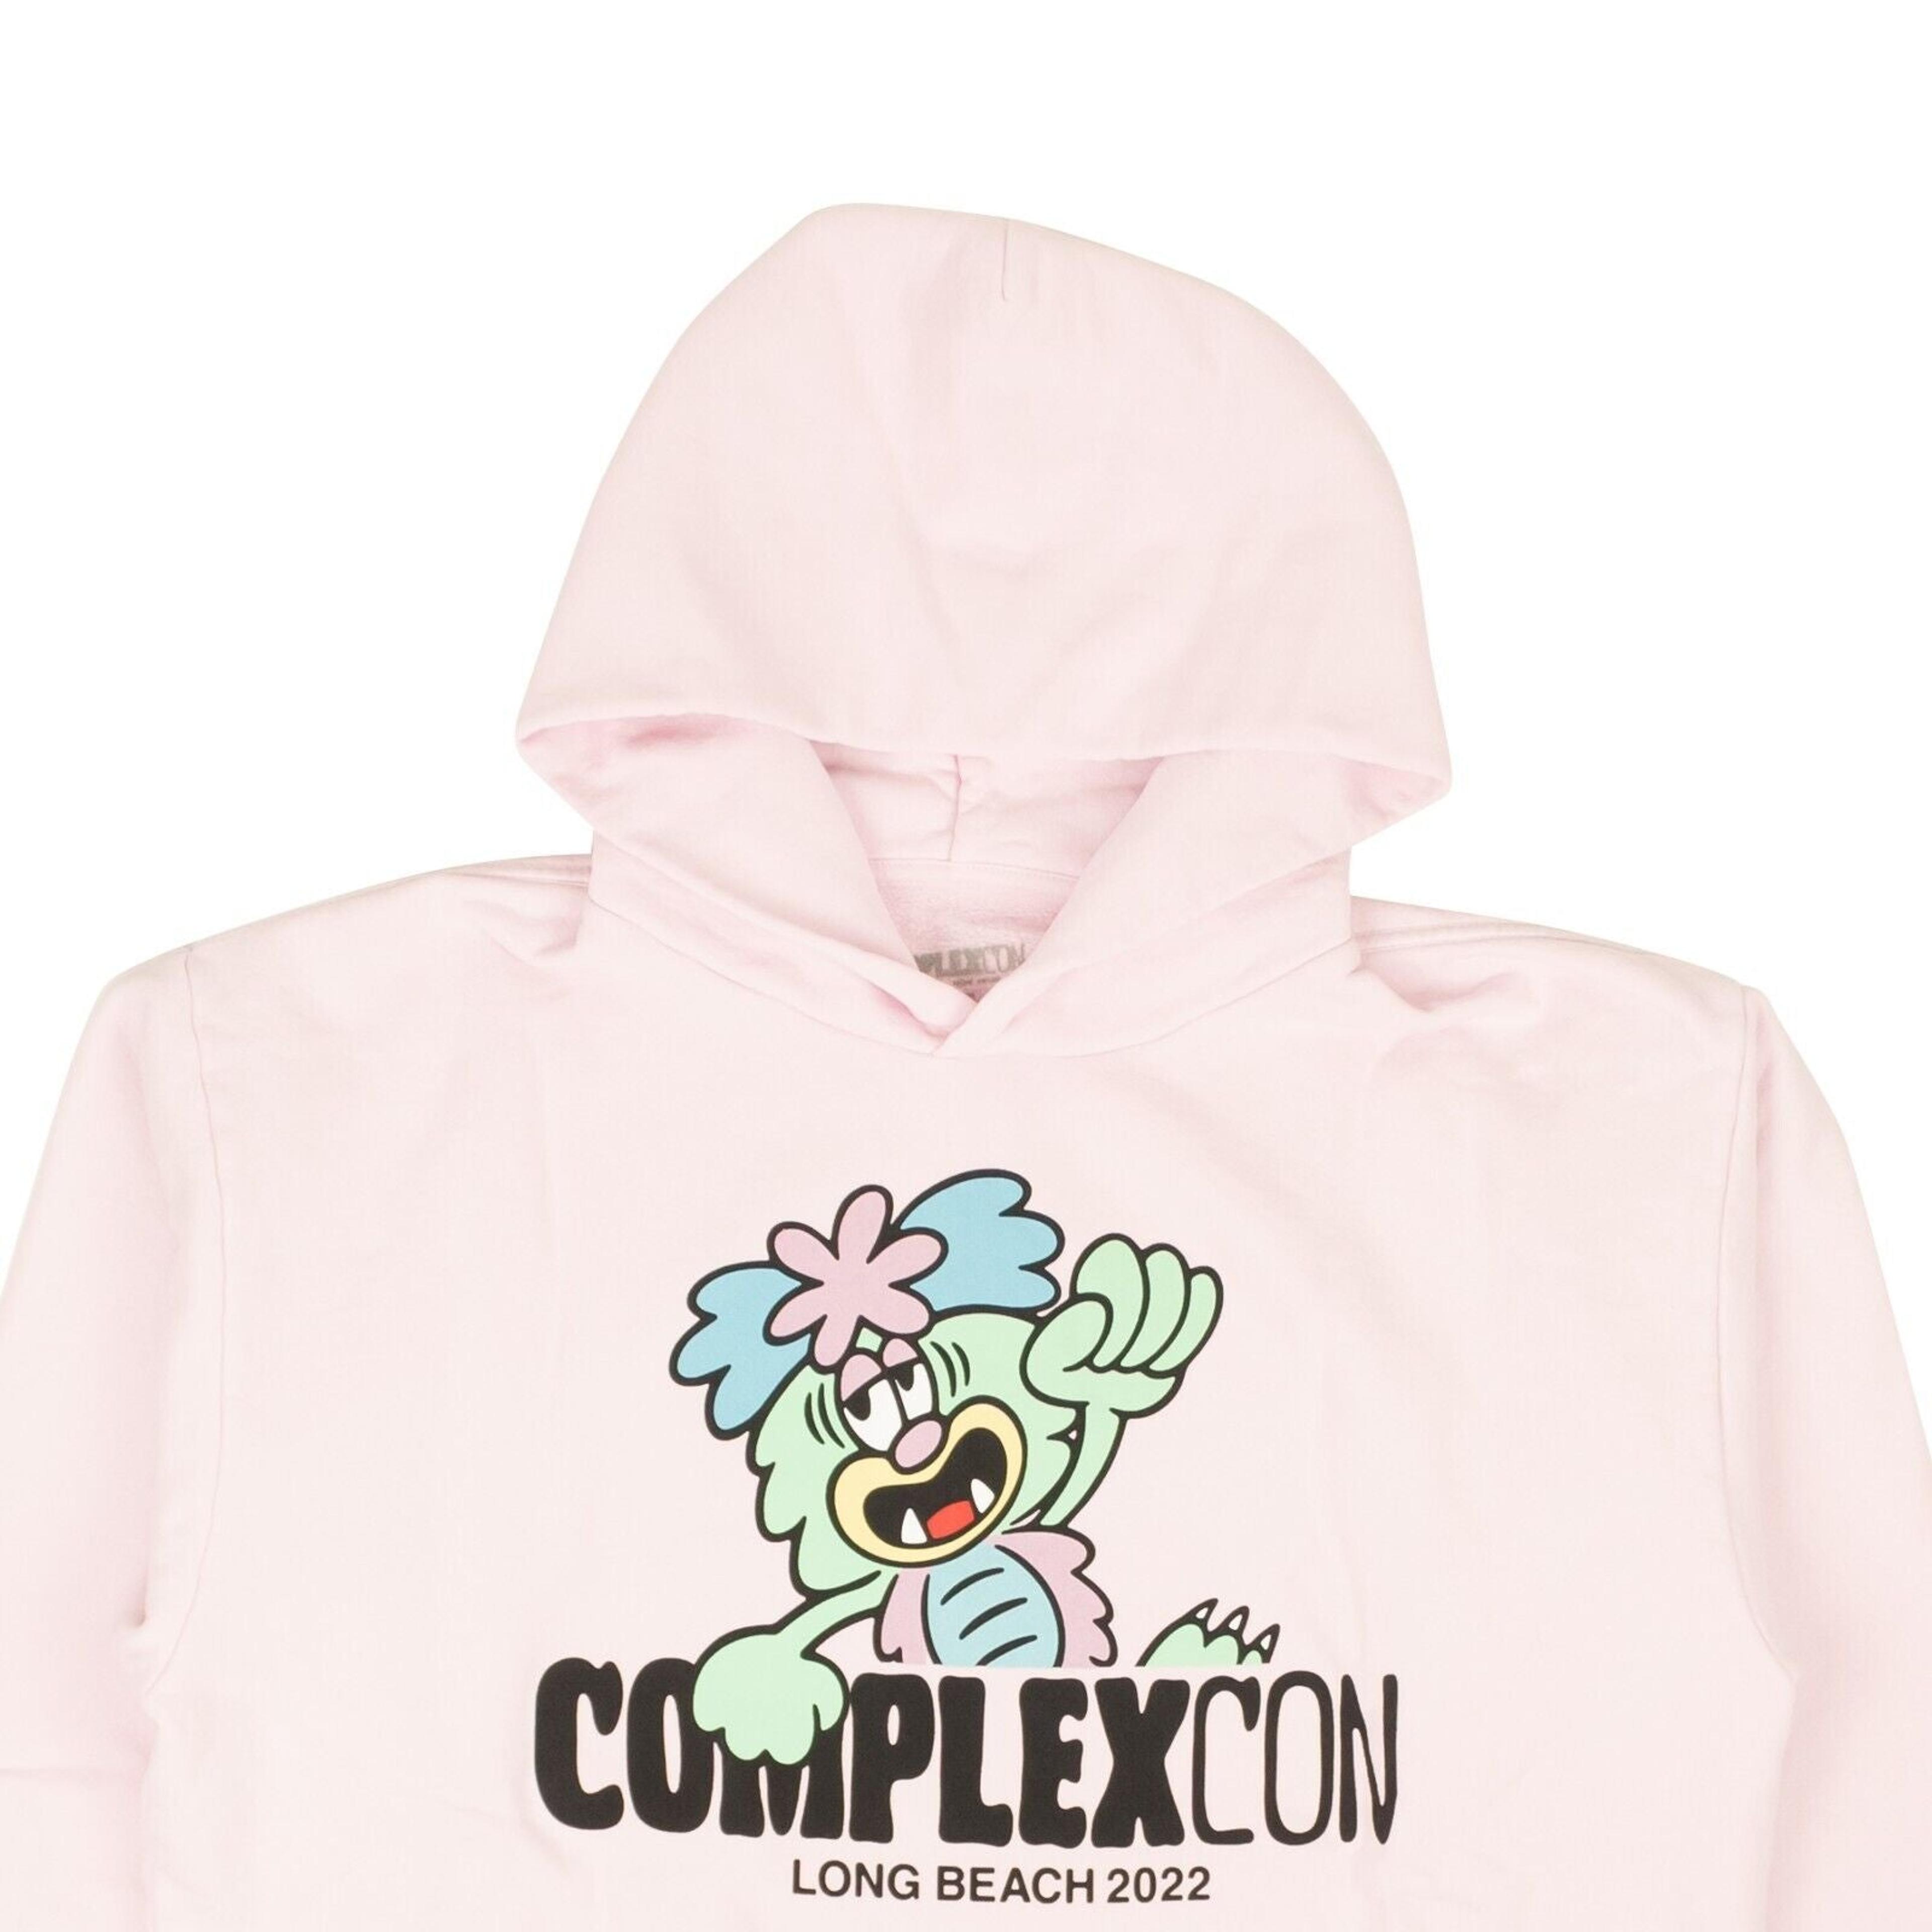 Alternate View 1 of Complexcon X Verdy Hoodie - Pink